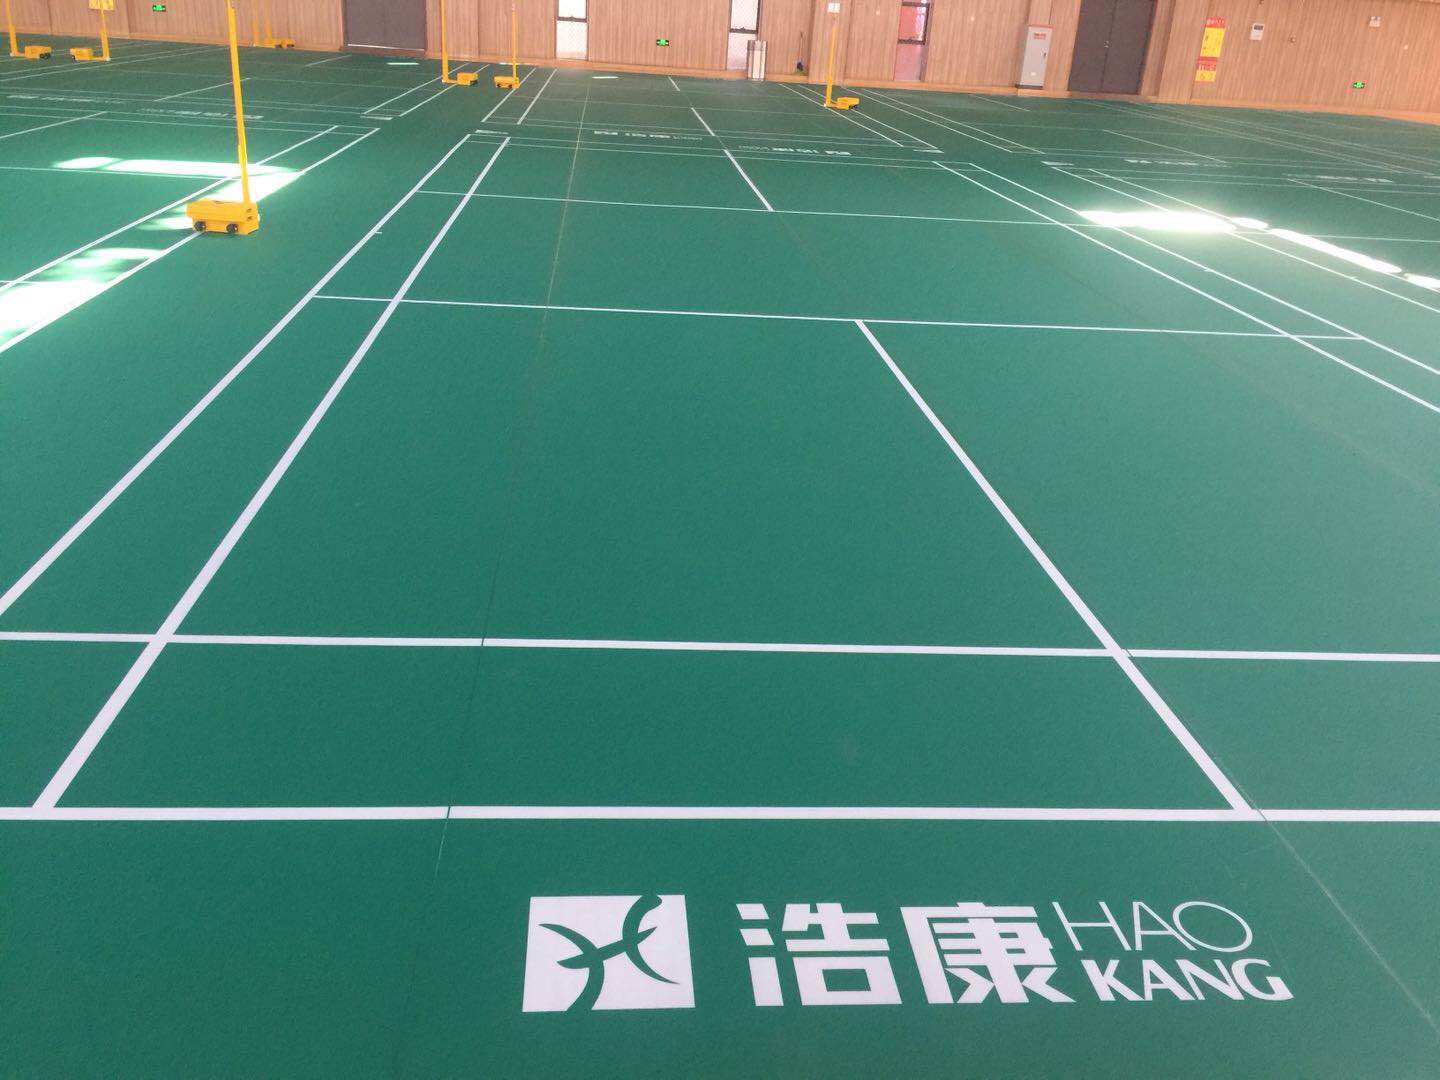 Haokang H7 badminton floor waiting for you at Tianjin University of Science and Technology